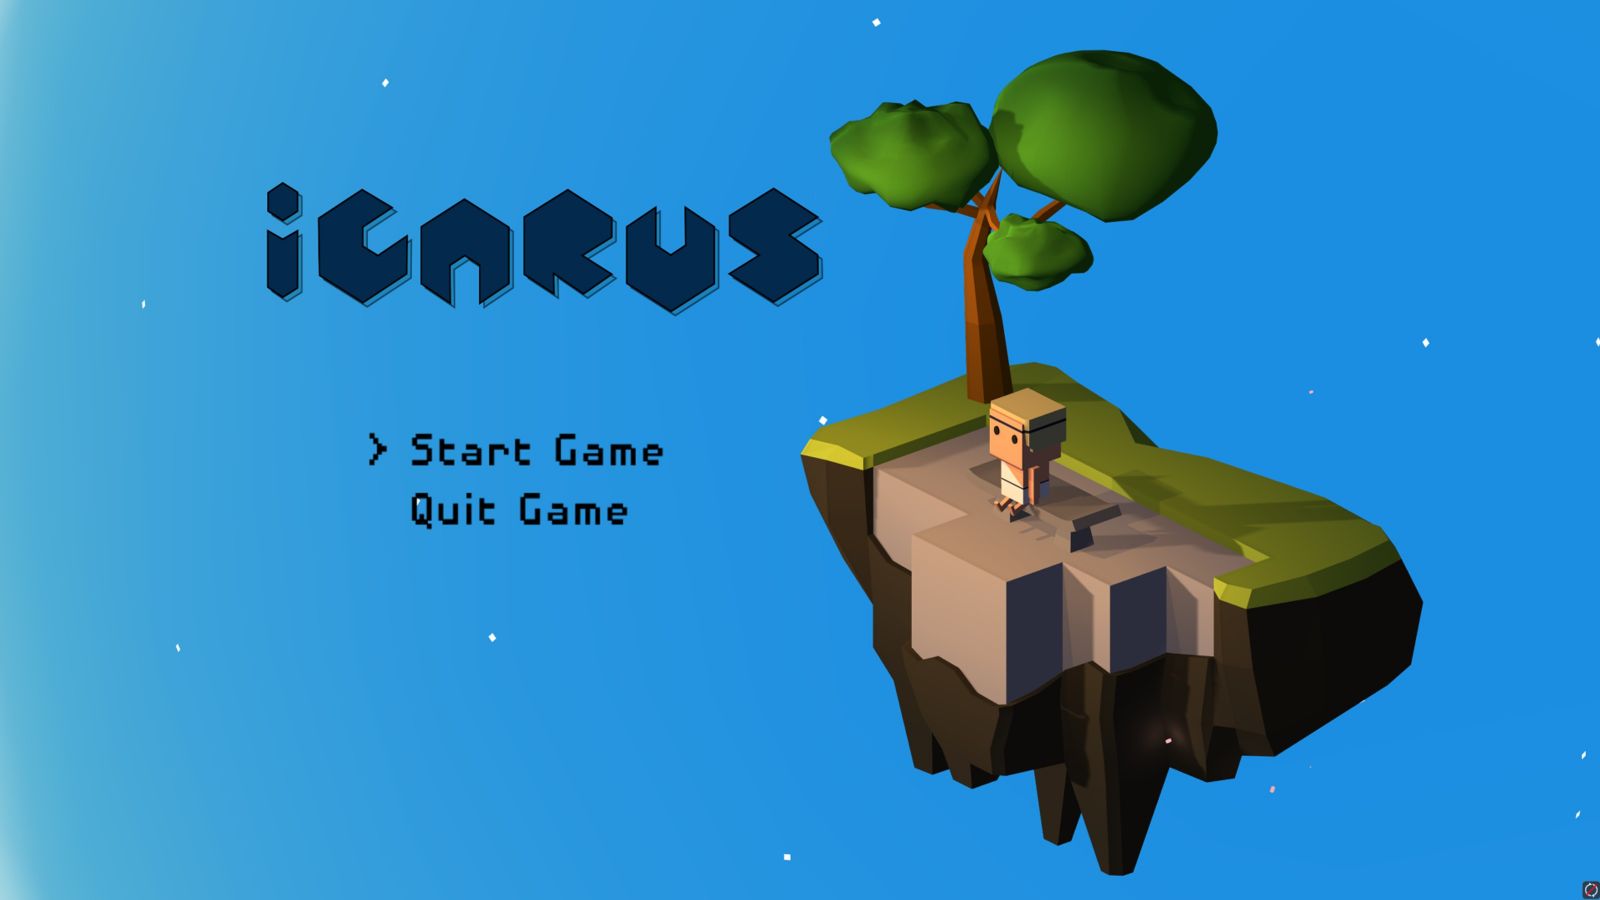 A person sitting on a computer generated island floating in blue space with the words icarus and start game and quit game to the left of the island.